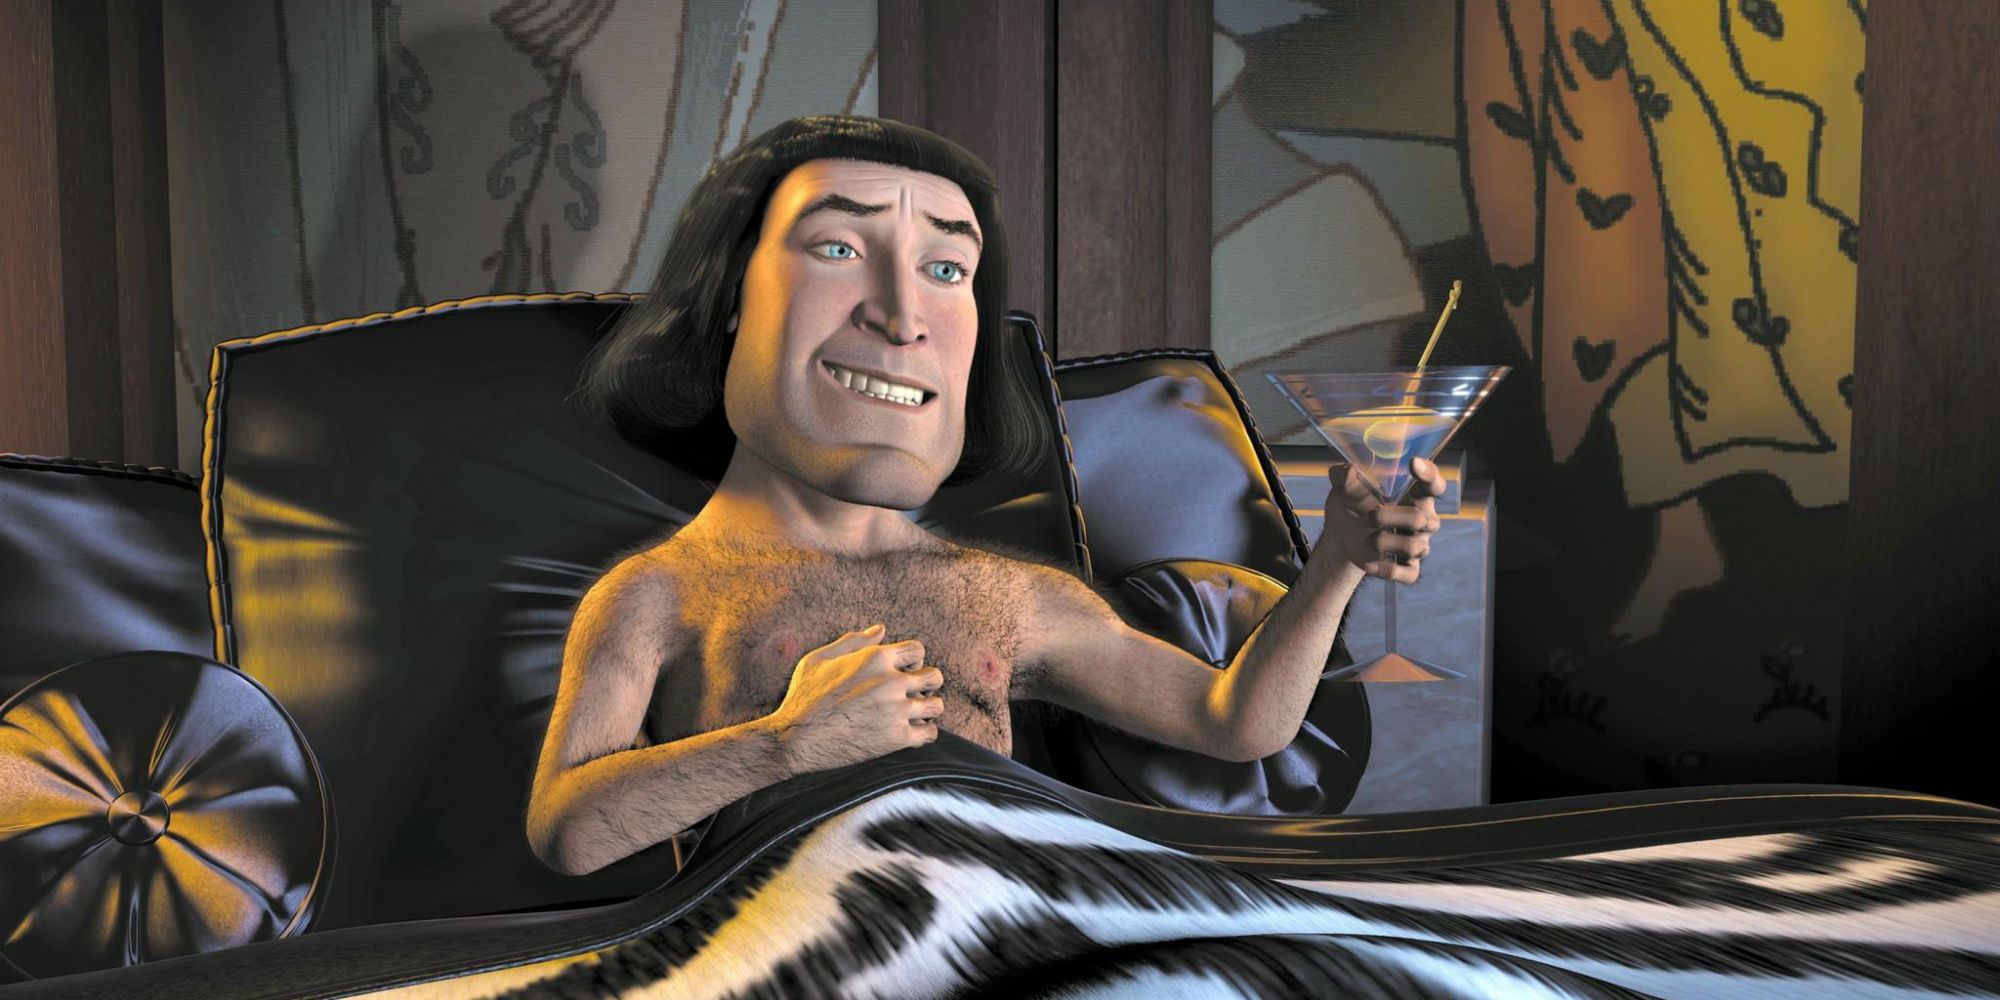 Lord Farquaad in his bed, holding a glass of martini